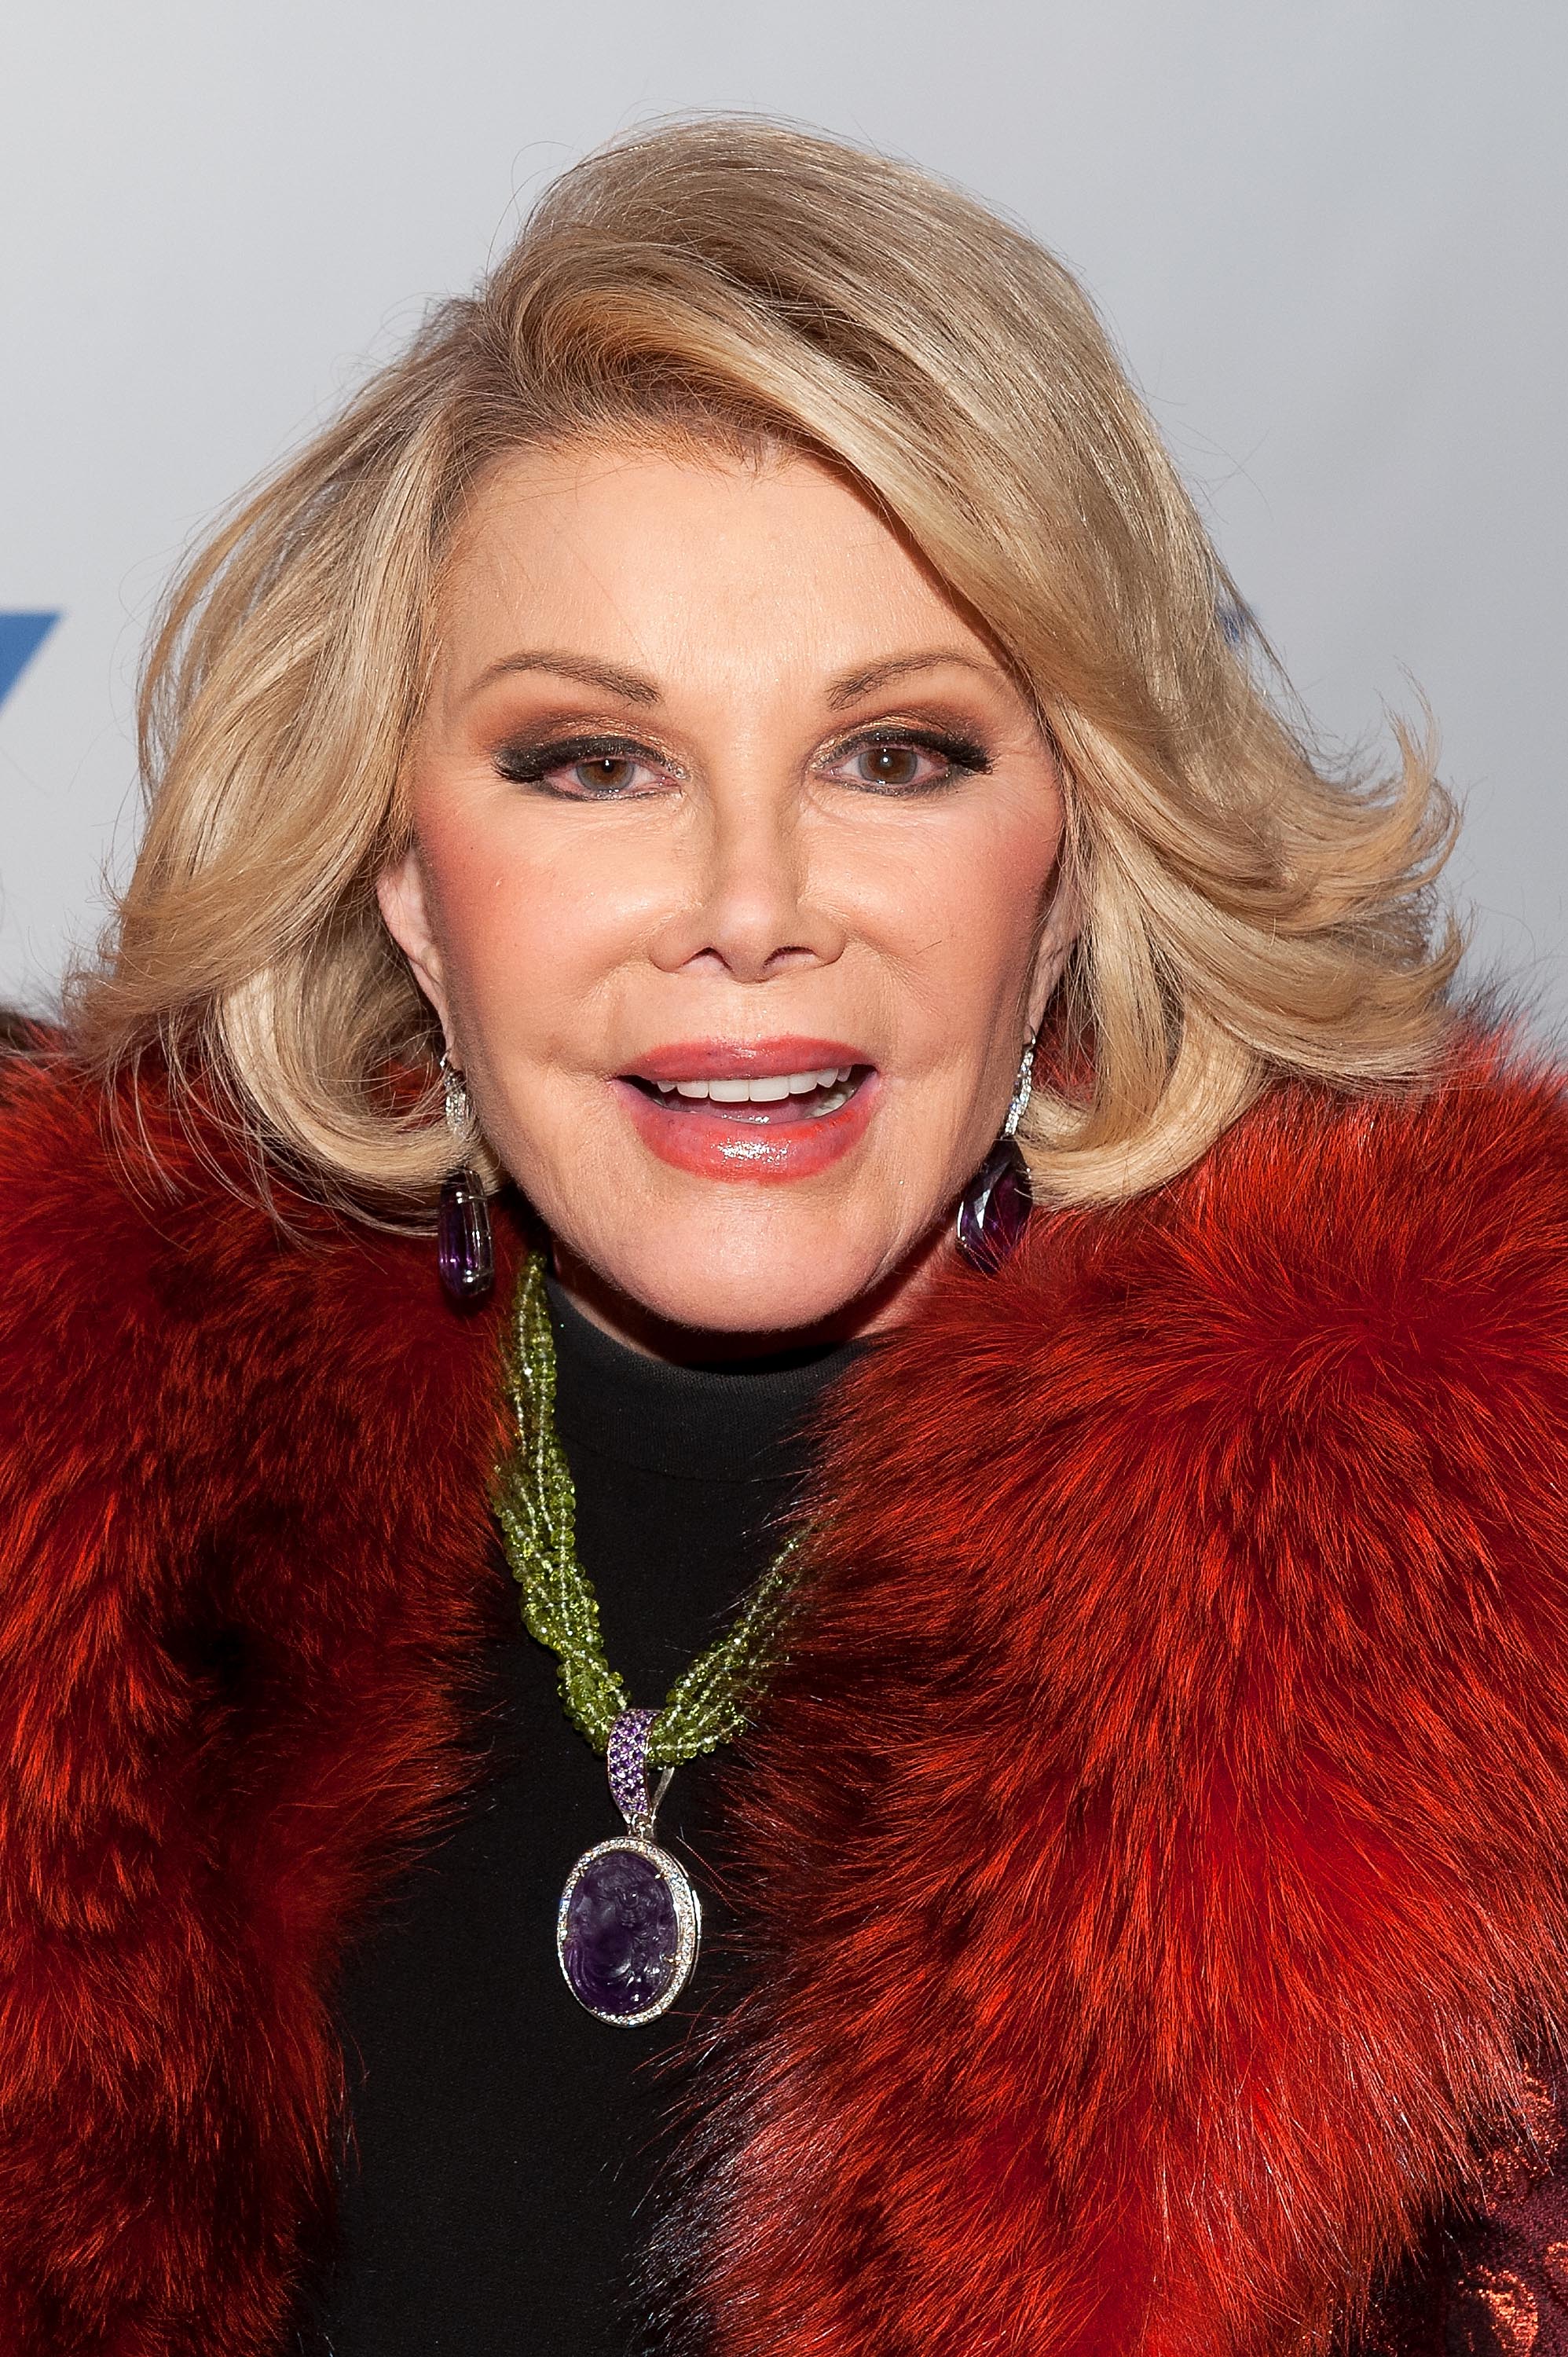 Joan Rivers attends An Evening With Joan And Melissa Rivers at the 92nd Street Y on Jan. 22, 2014 in New York City.